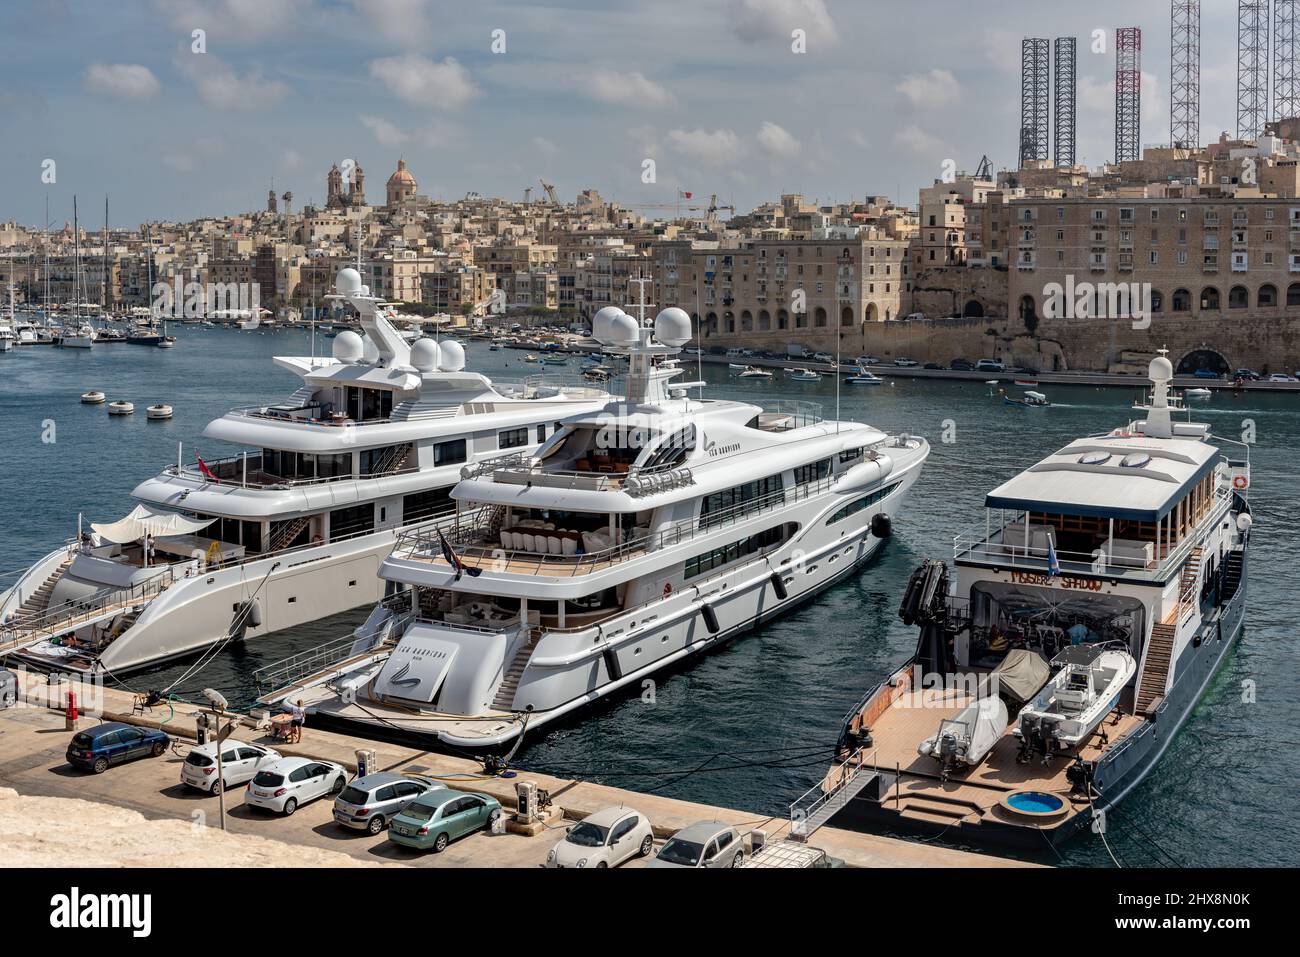 The 212 ft luxury super yacht Sea Rhapsody, and 240 ft Plan B, berthed in Dockyard Creek in Valletta's Grand Harbour. Stock Photo